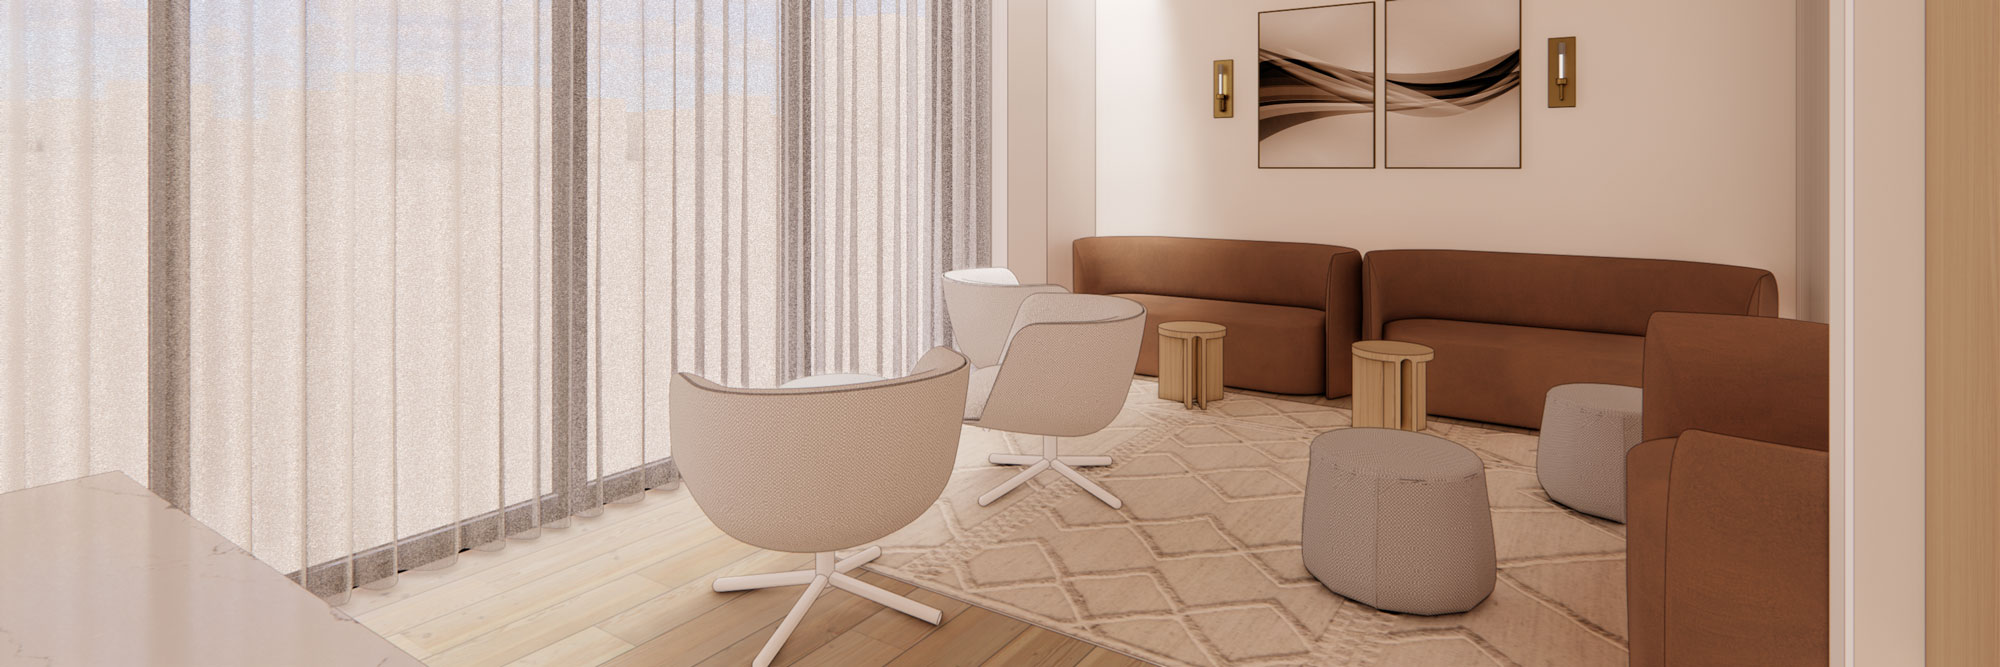 sojourn-relaxation-room-render